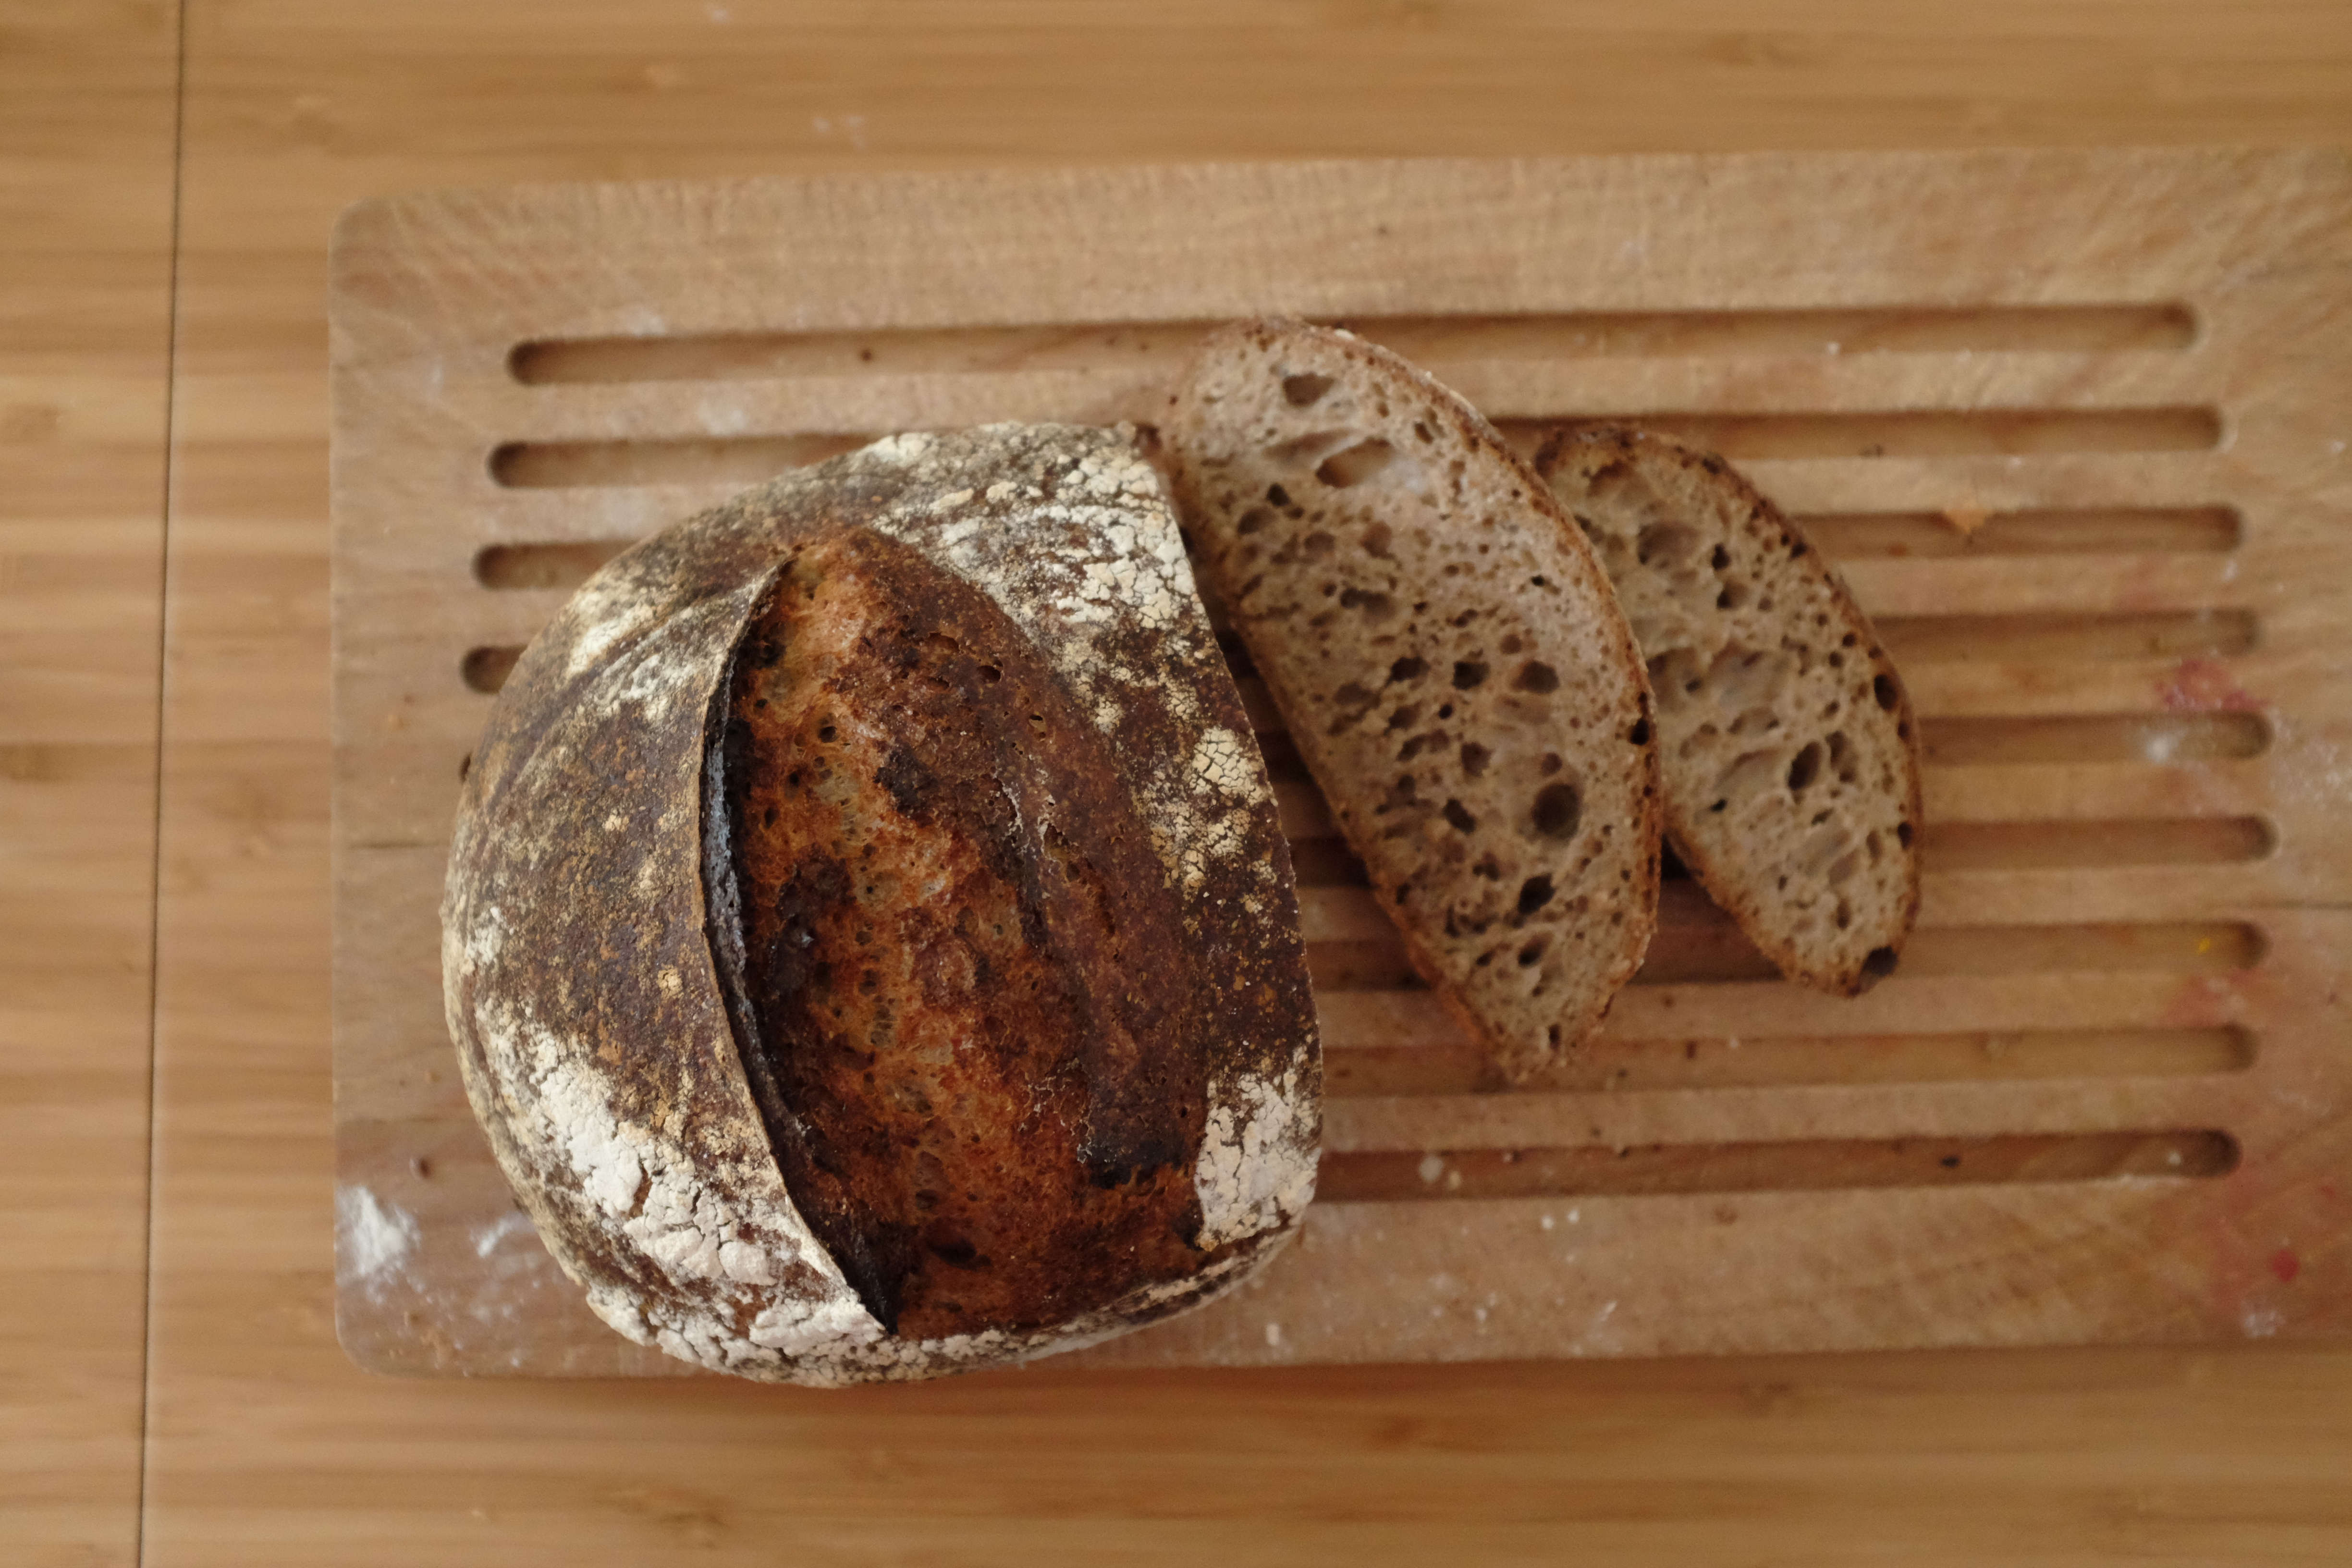 An image of a bread called “Wholemeal Sourdough with a Splash of Rye (Again)”